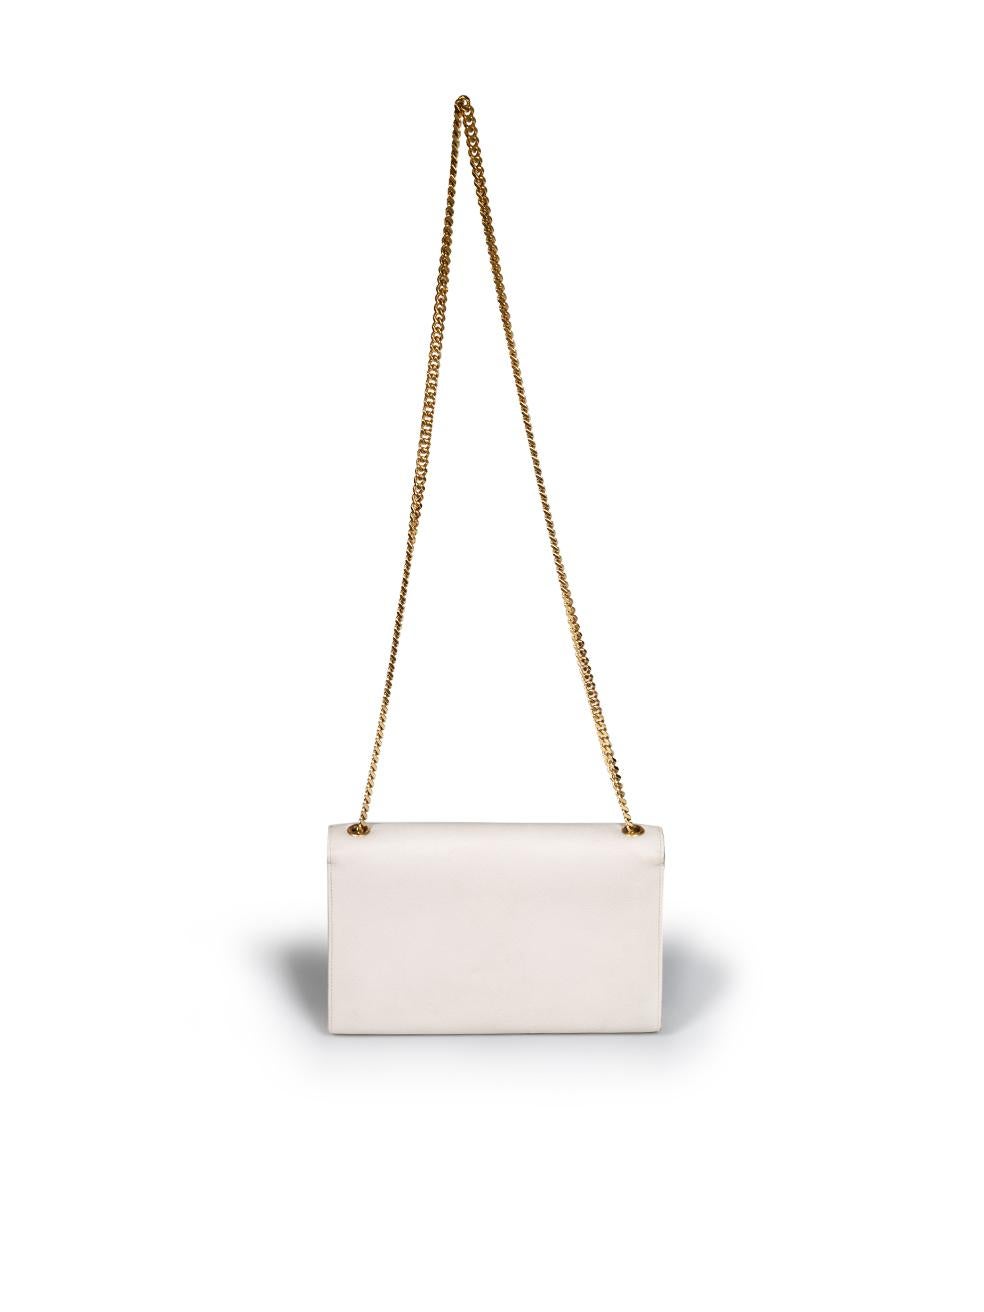 Saint Laurent White Leather Kate Medium Shoulder Bag In Good Condition For Sale In London, GB